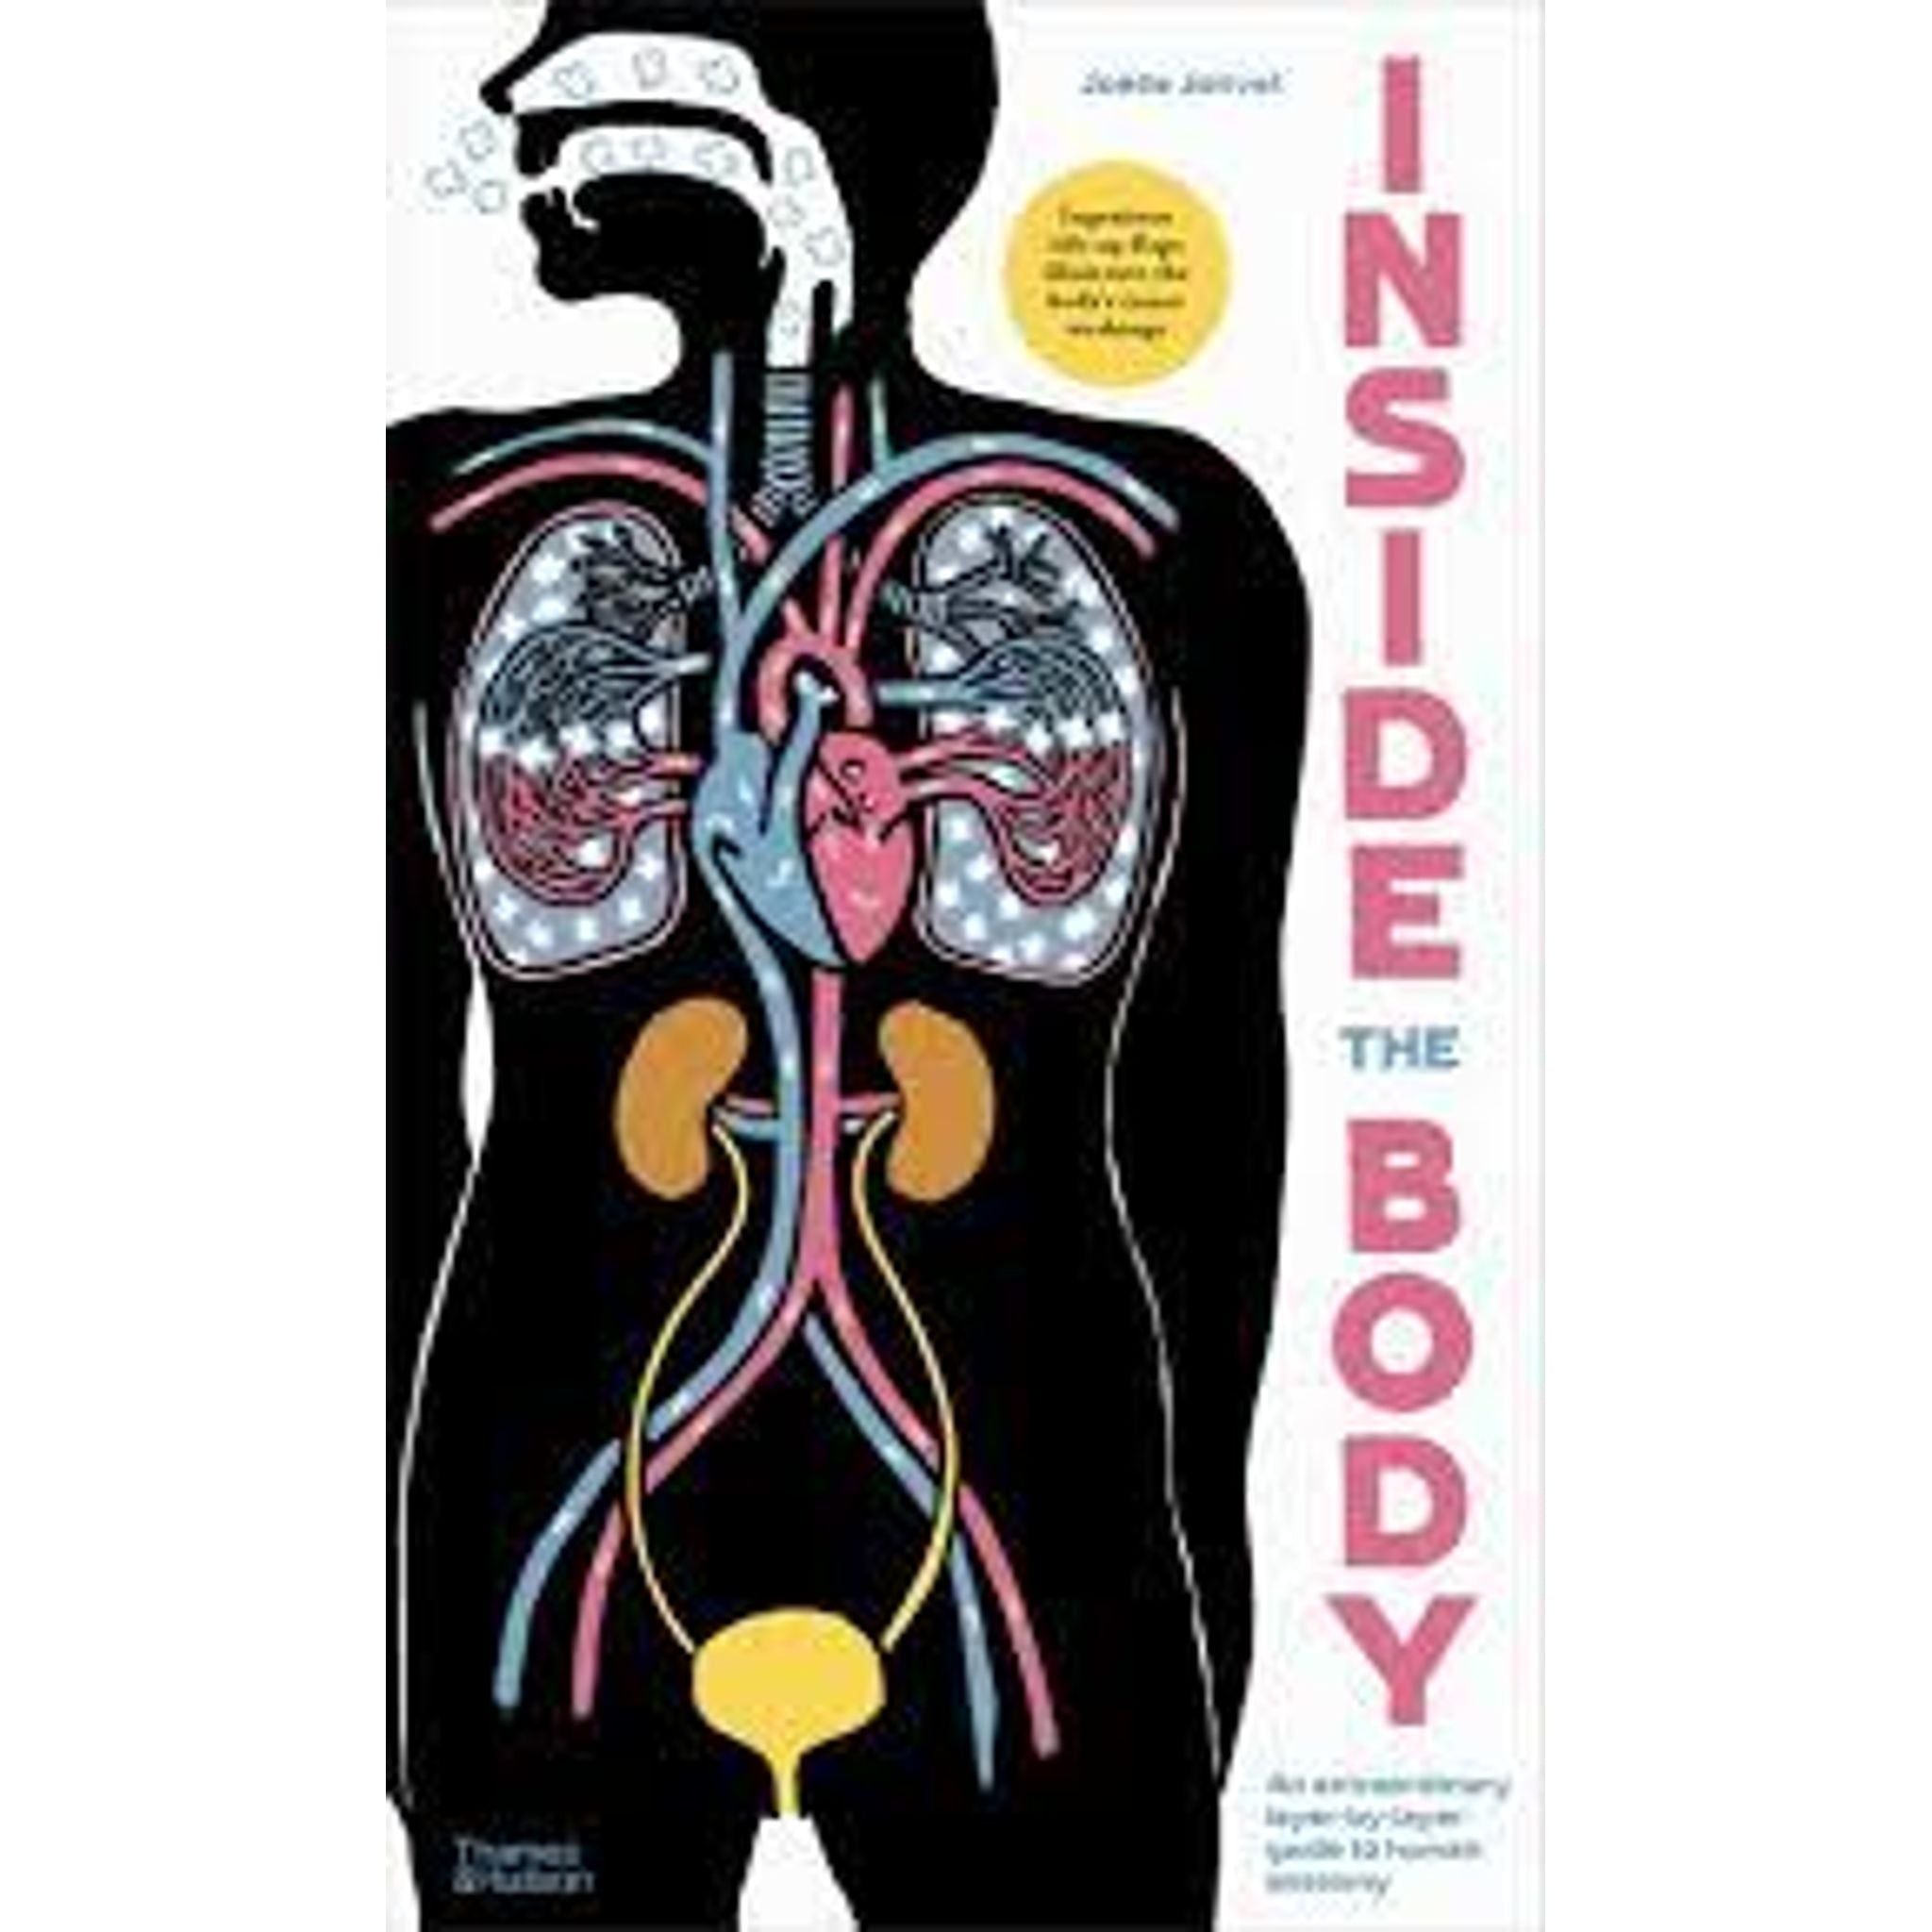 Inside The Body: An Extraordinary layer by layer guide to the human anatomy - Toybox Tales